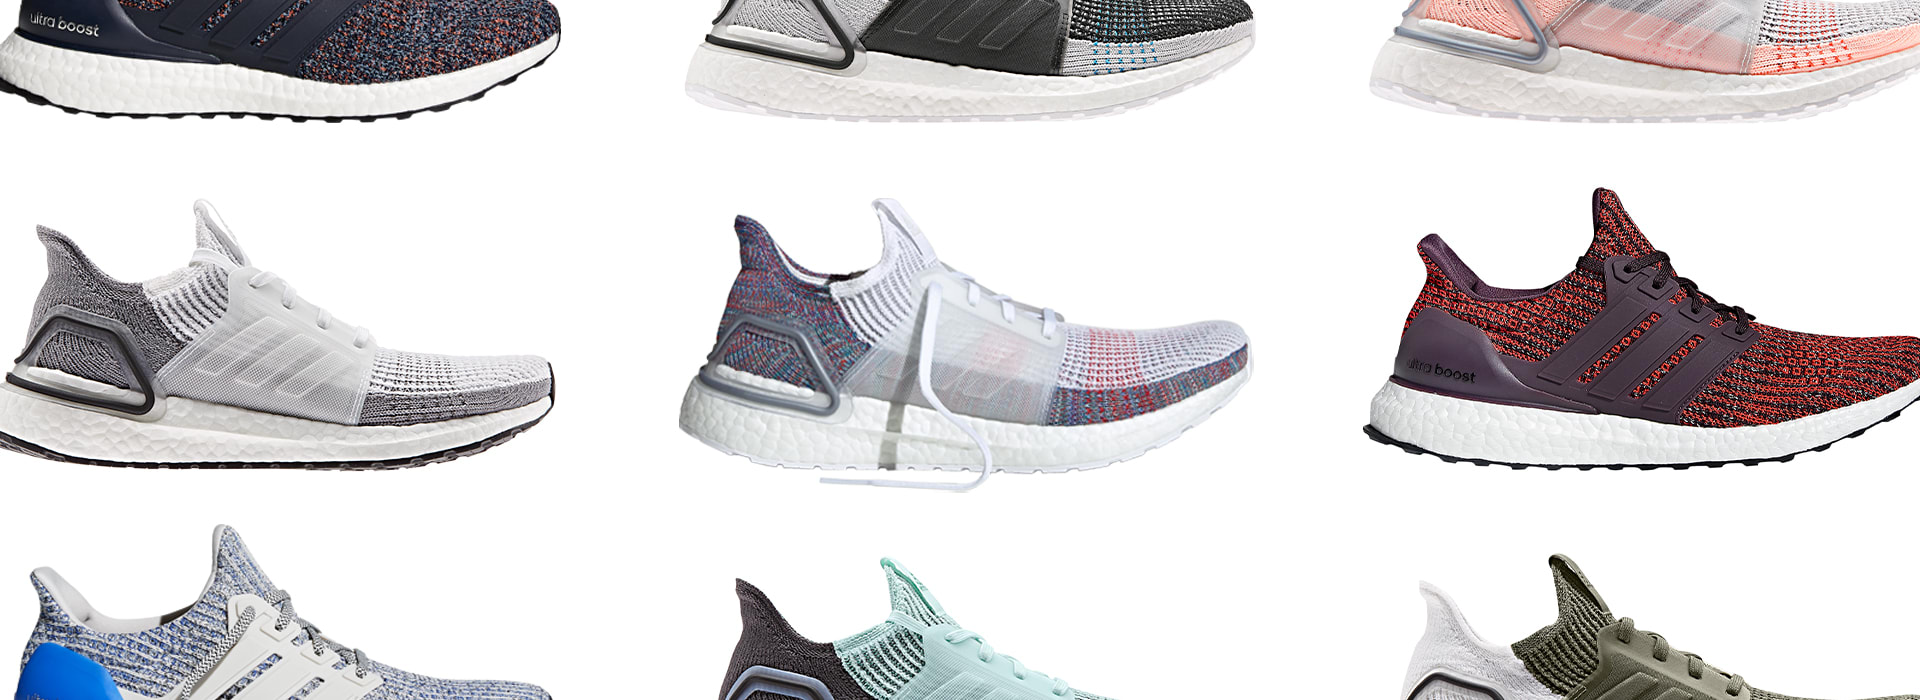 adidas way one shoes 2019